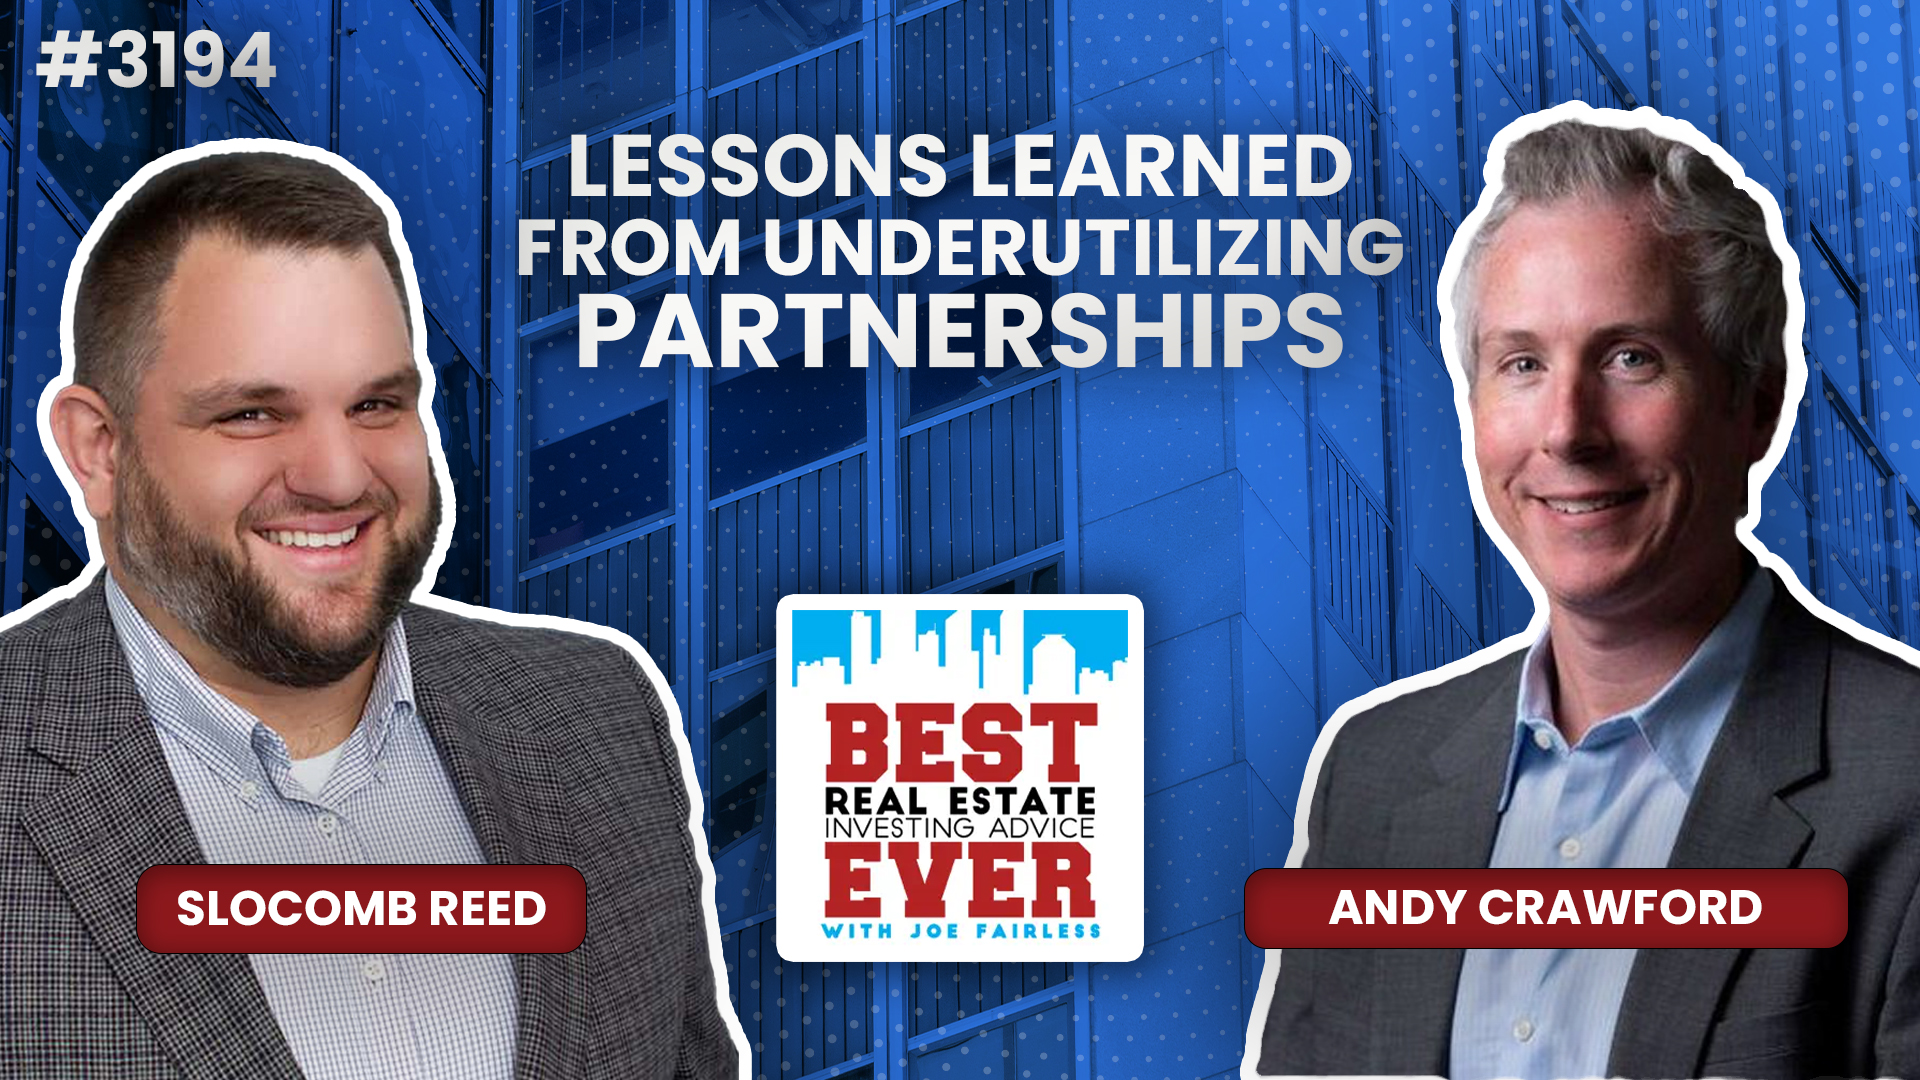 JF3194: Lessons Learned from Underutilizing Partnerships ft. Andy Crawford